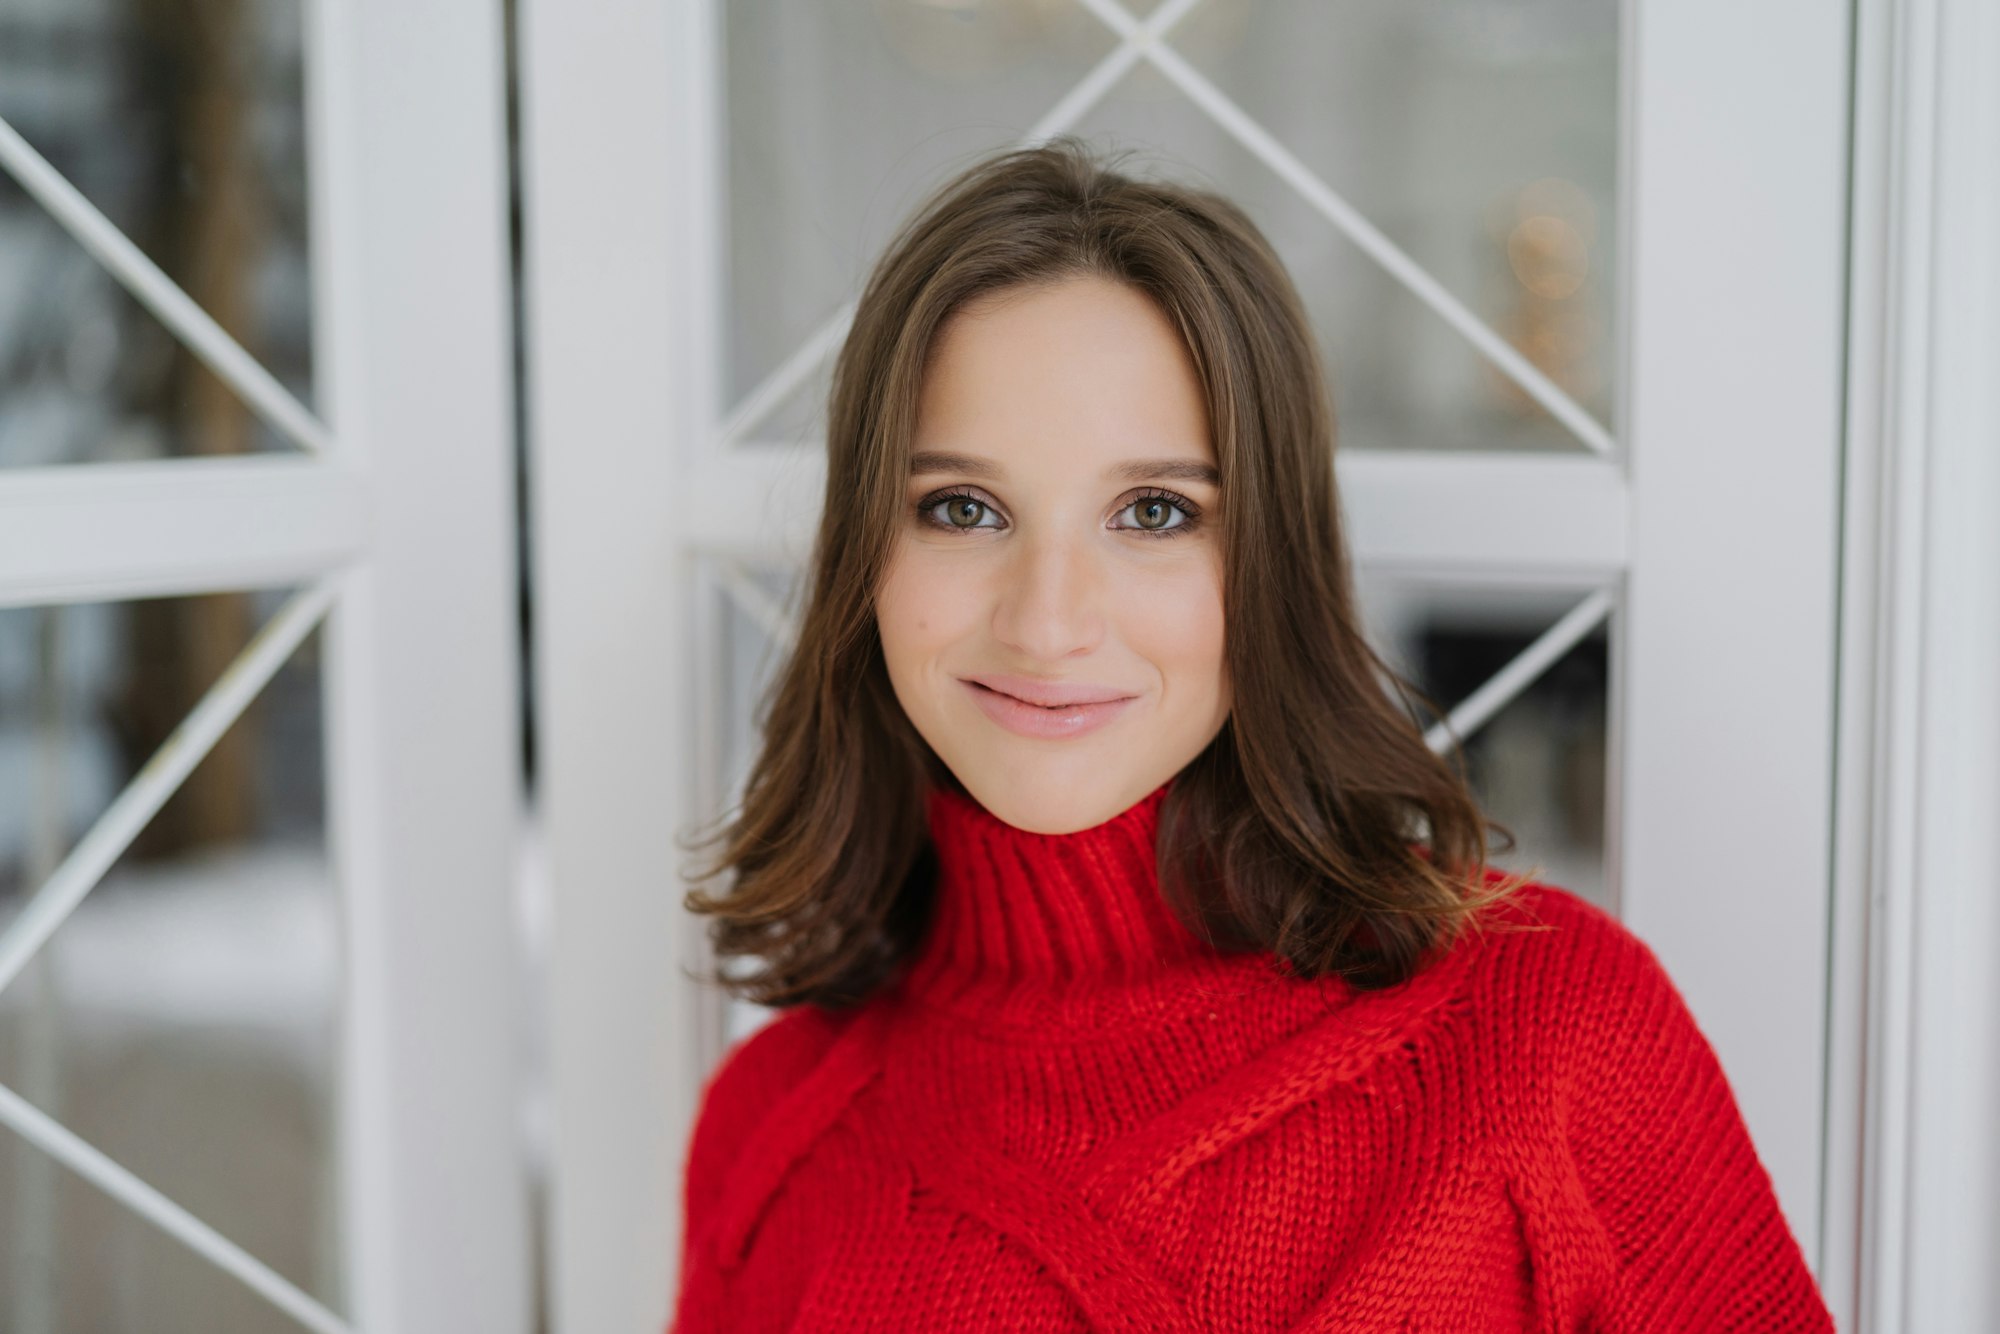 Headshot of charming woman with dark hair, wears knitted sweater, looks directly at camera